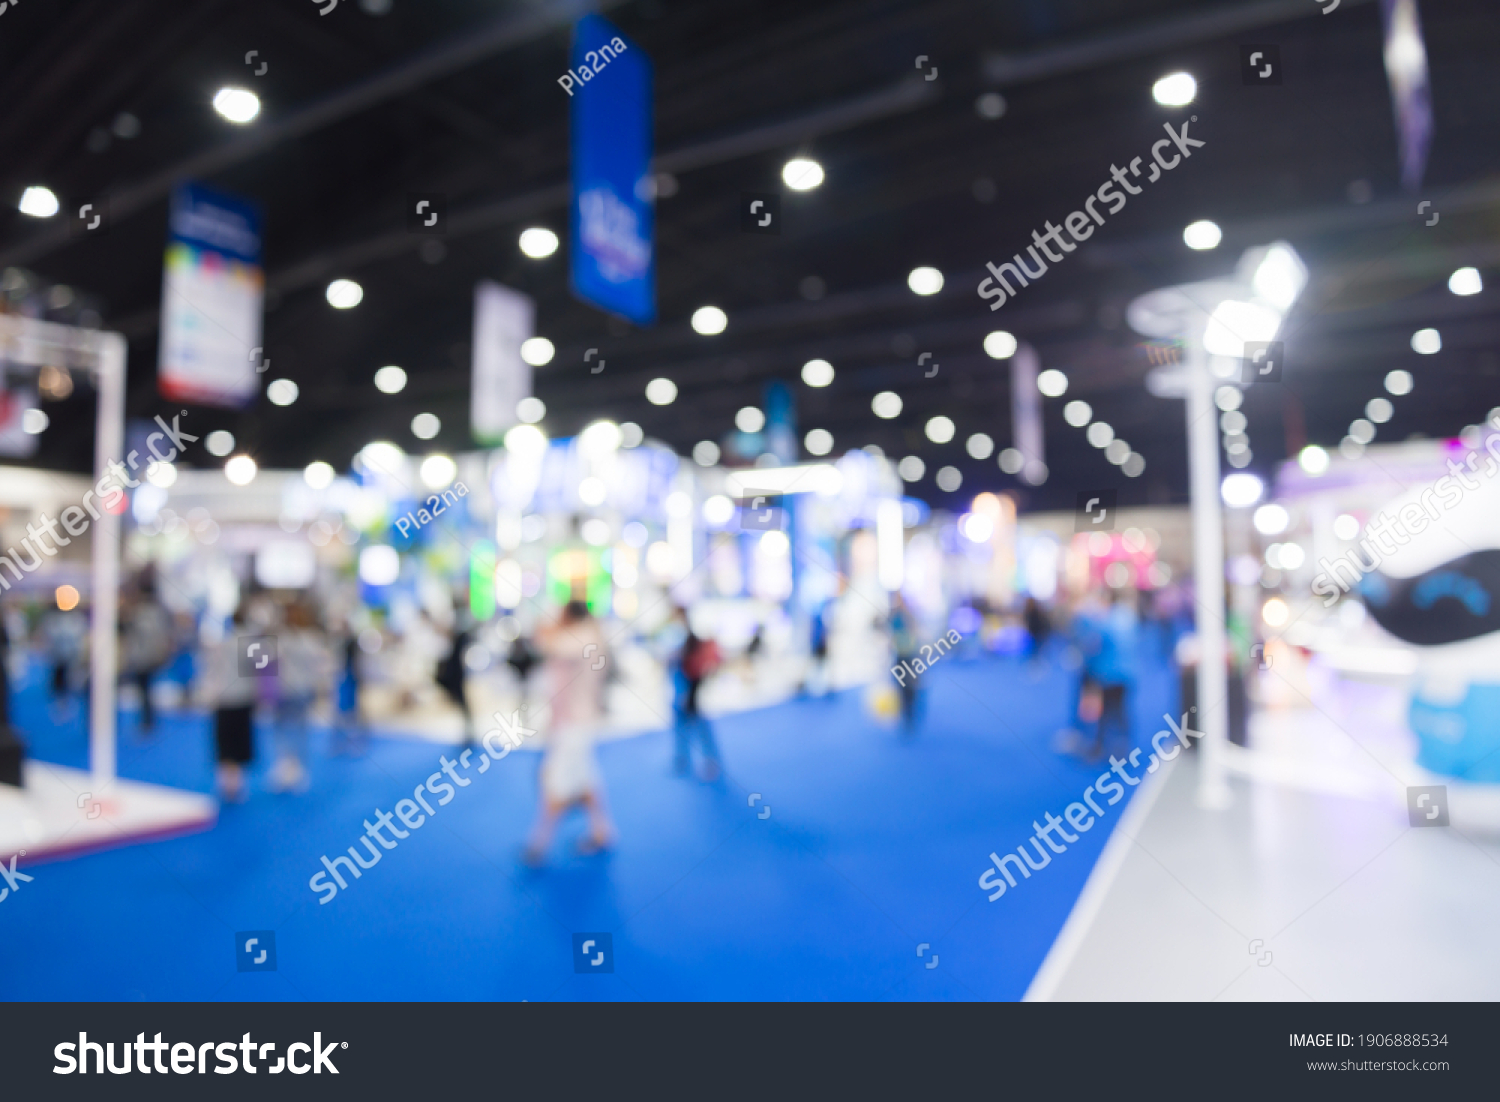 Abstract blur people in exhibition hall event trade show expo background. Large international exhibition, convention center, business marketing and event fair organizer concept. #1906888534